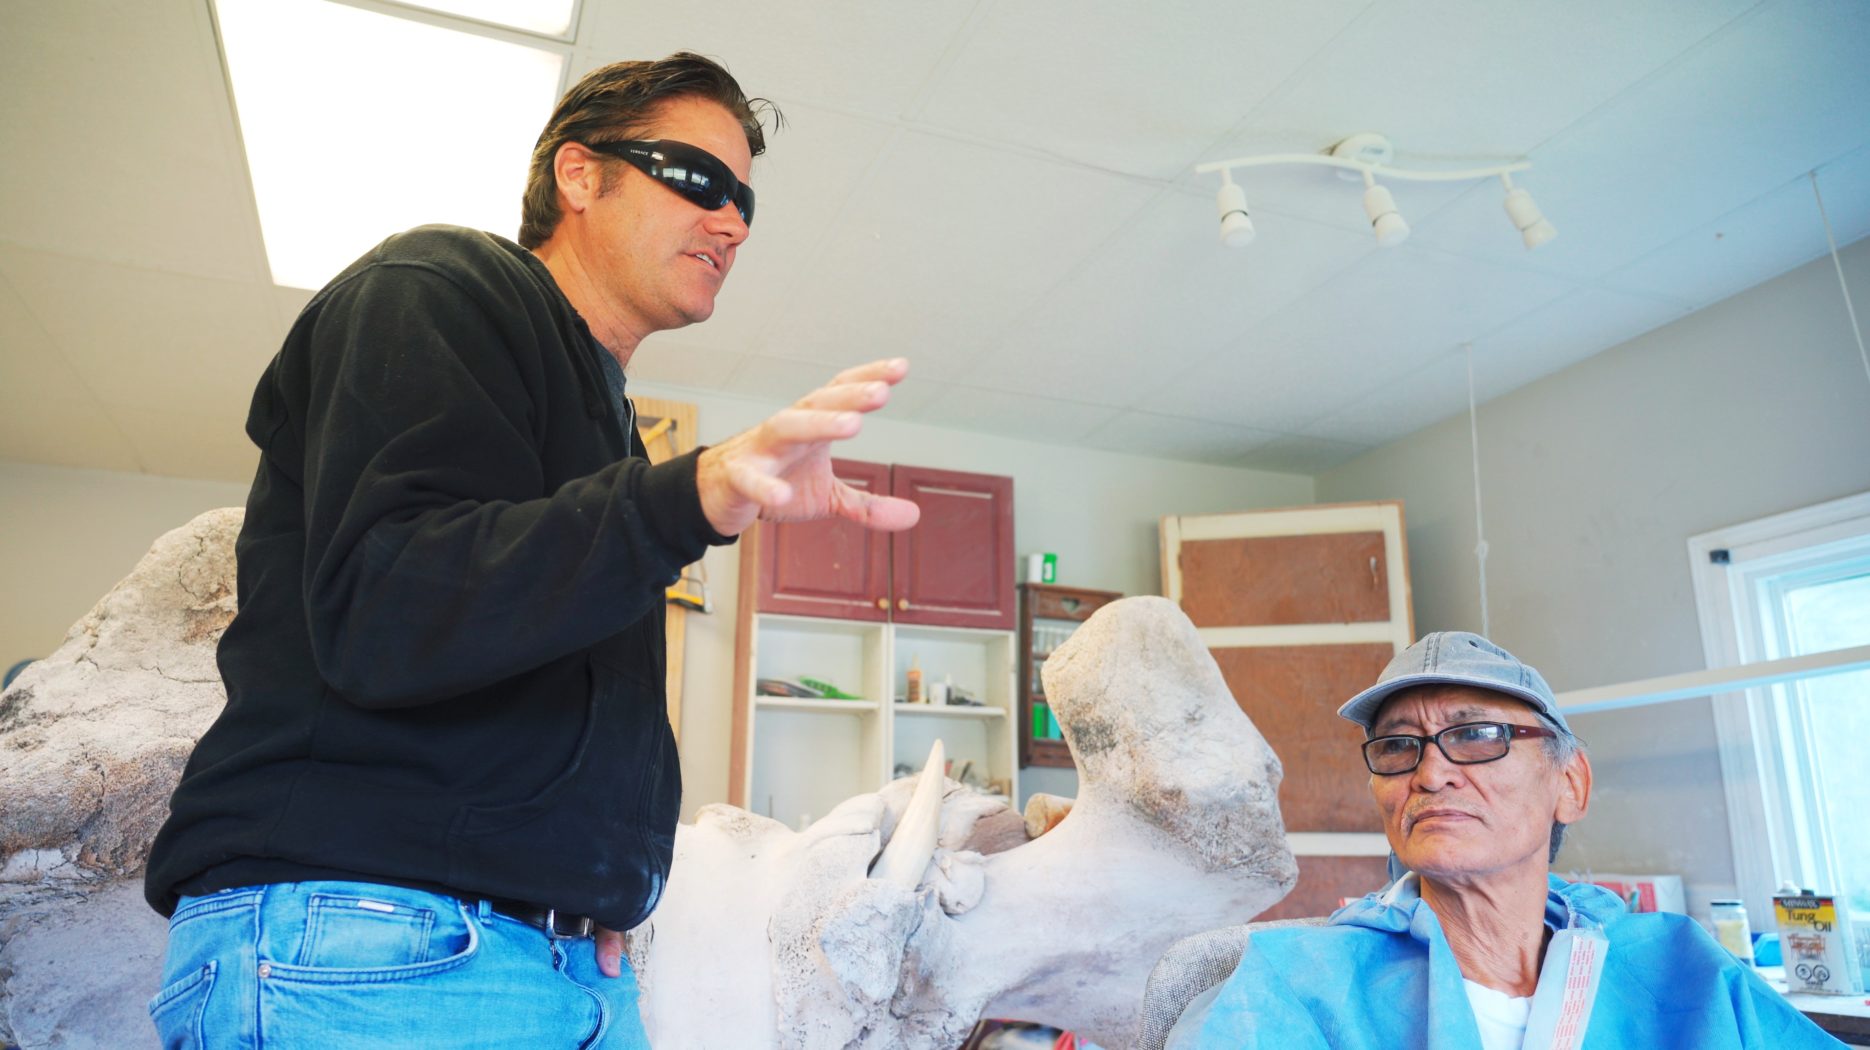 Man with sunglasses next to Inuit Artist